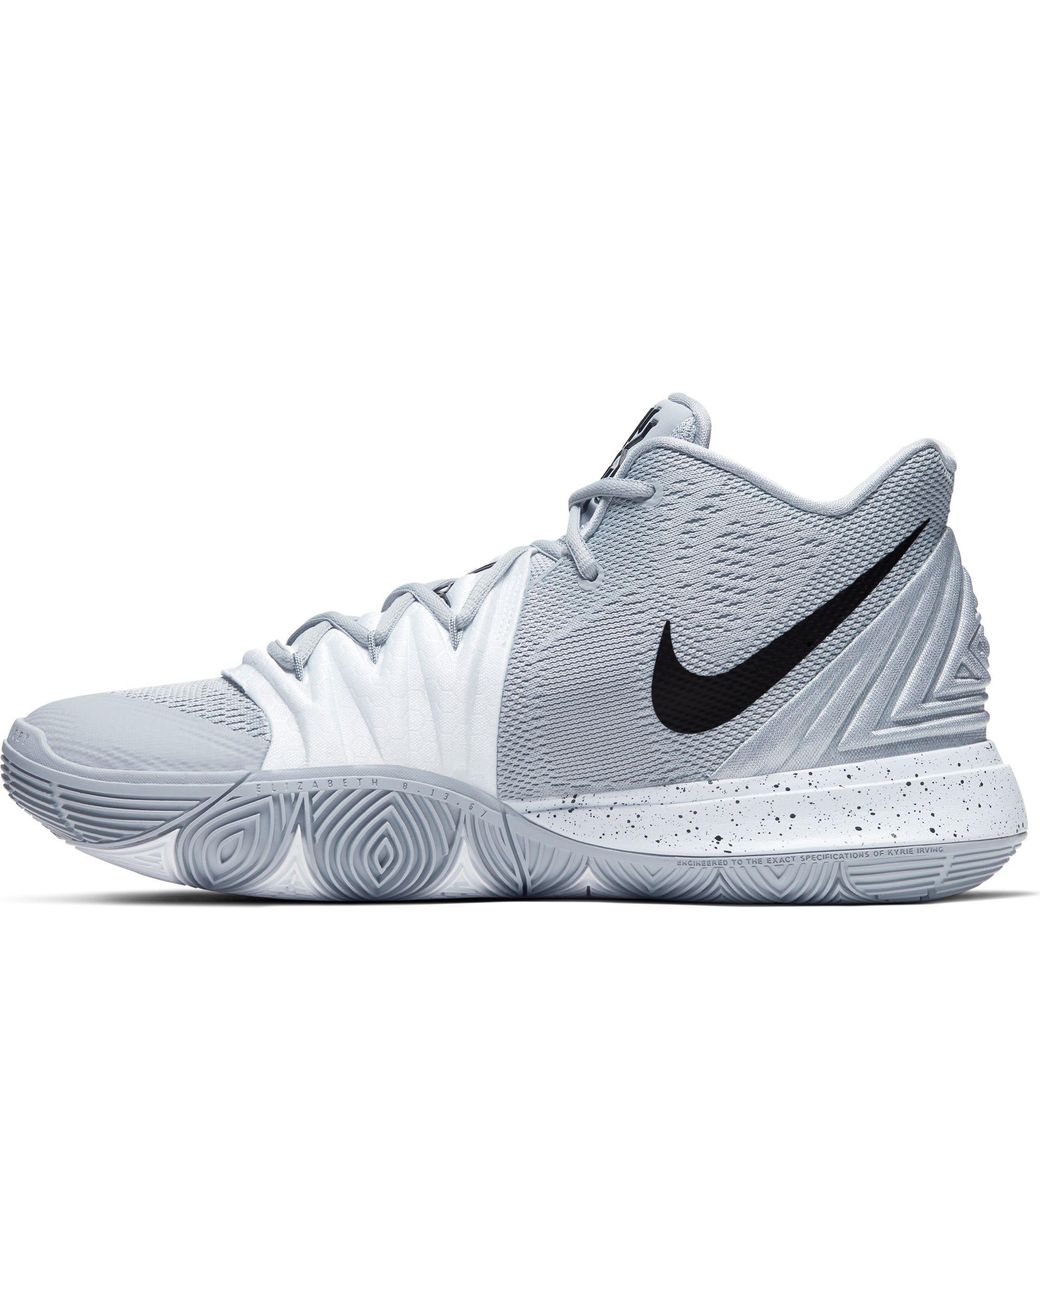 Nike Rubber Kyrie 5 Basketball Shoes in Grey/Black (Gray) for Men | Lyst